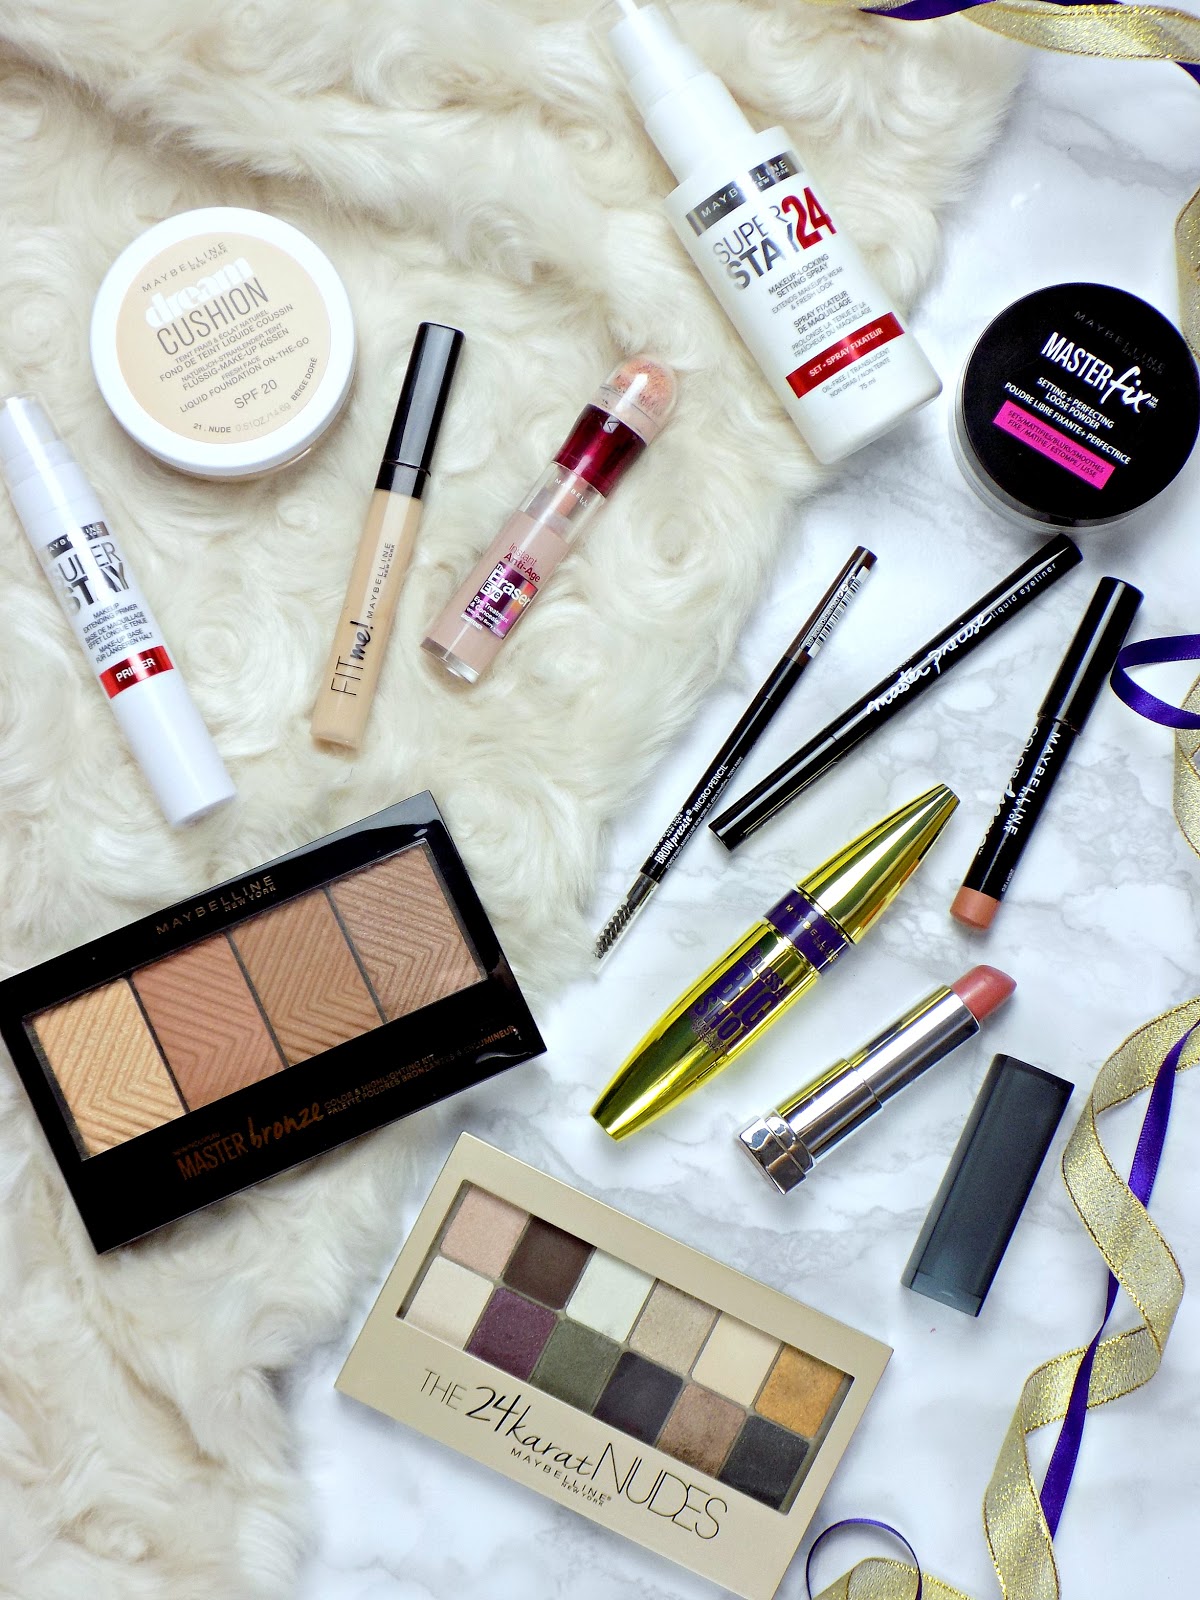 One brand makeup look: Maybelline